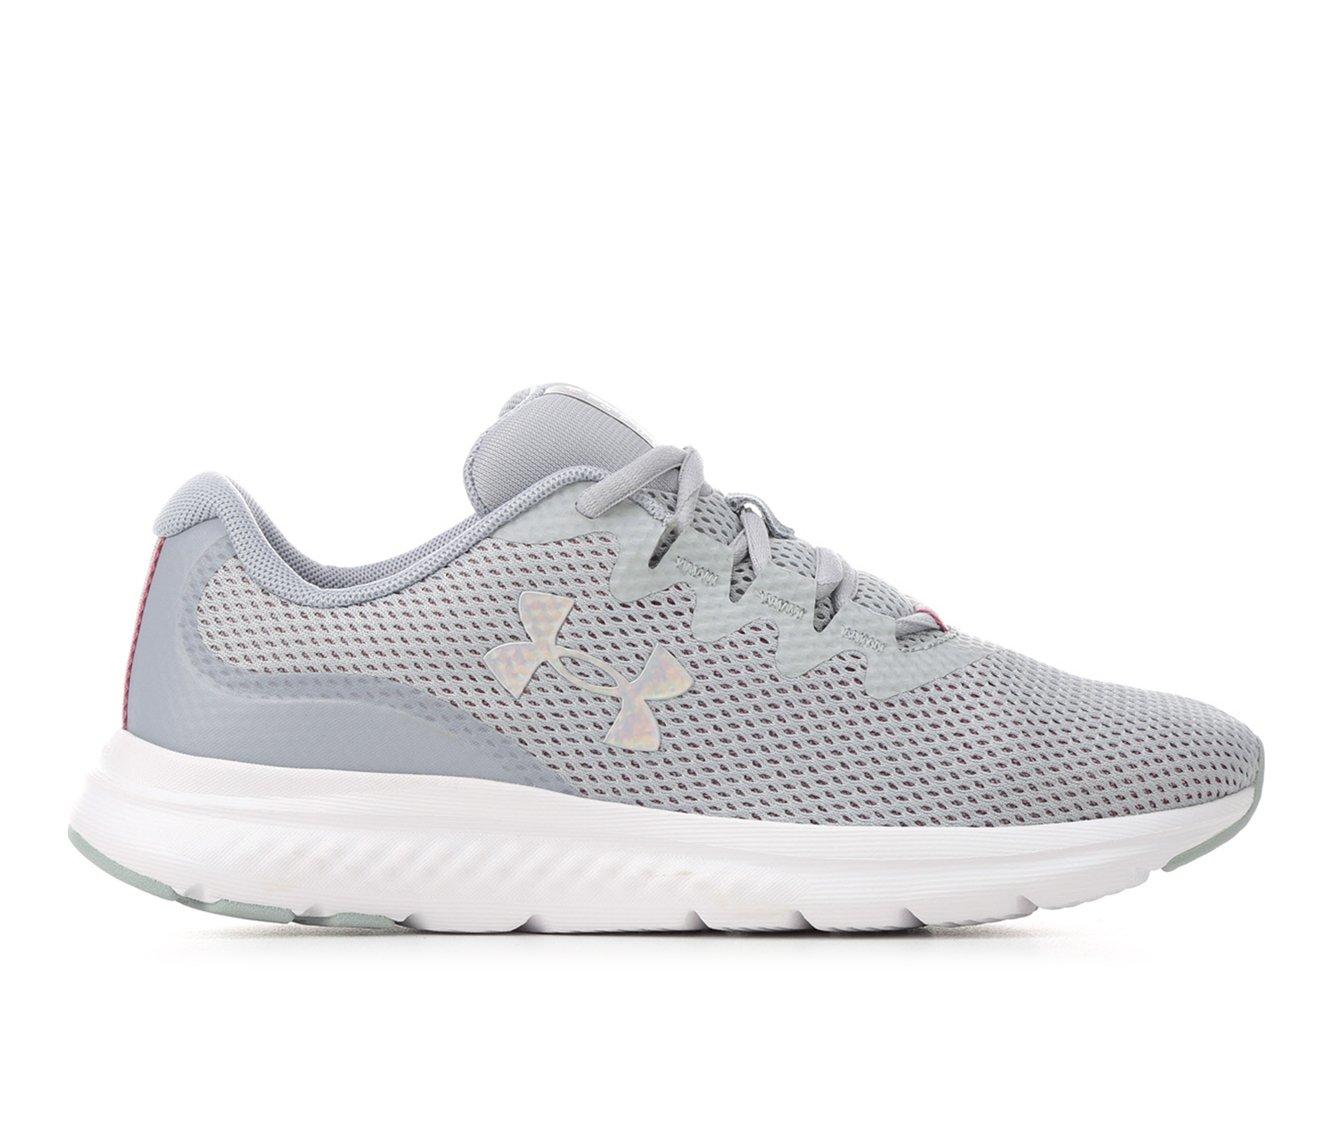 Women's Under Armour Charged 3 Iridescent